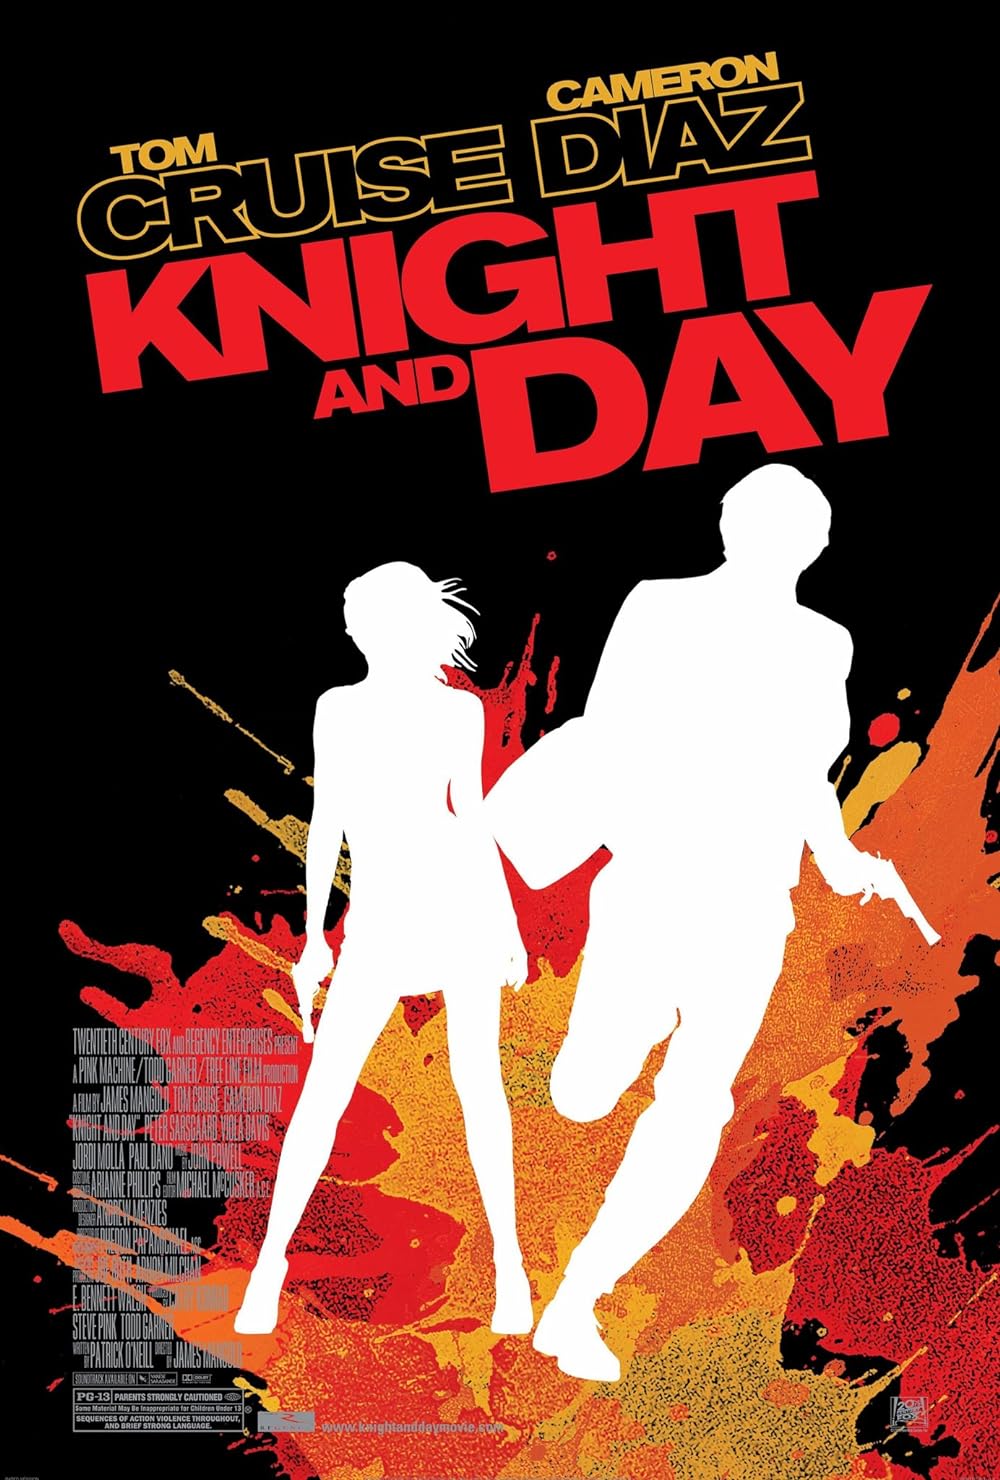 Knight and Day (2010) Extended Cut 192Kbps 23.976Fps 48Khz 2.0Ch DigitalTV Turkish Audio TAC